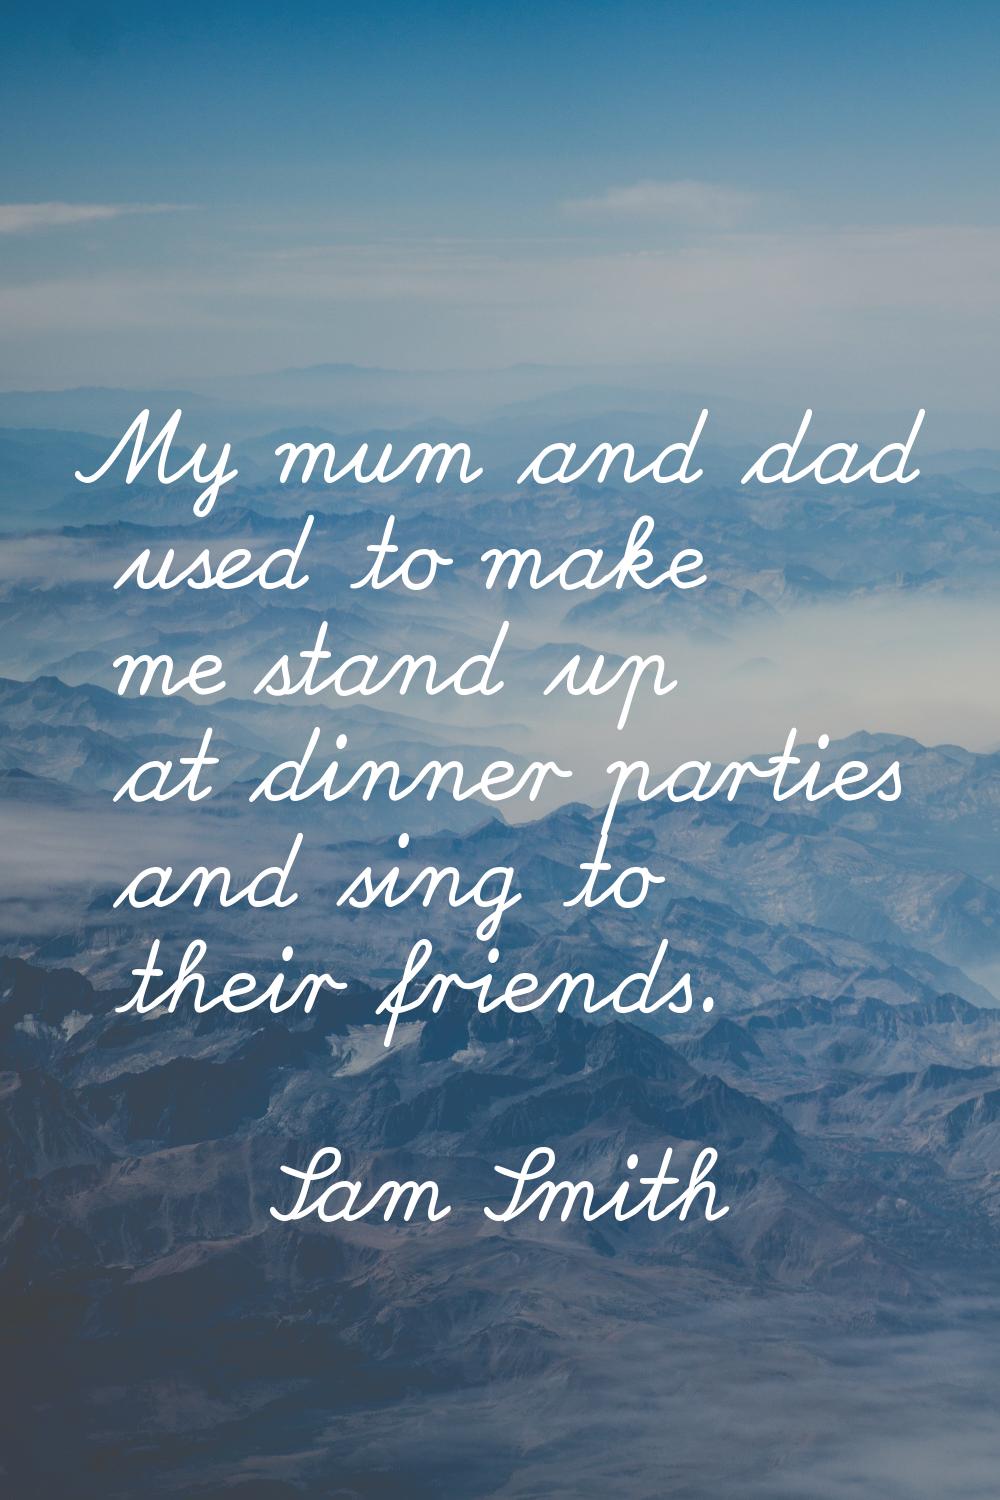 My mum and dad used to make me stand up at dinner parties and sing to their friends.